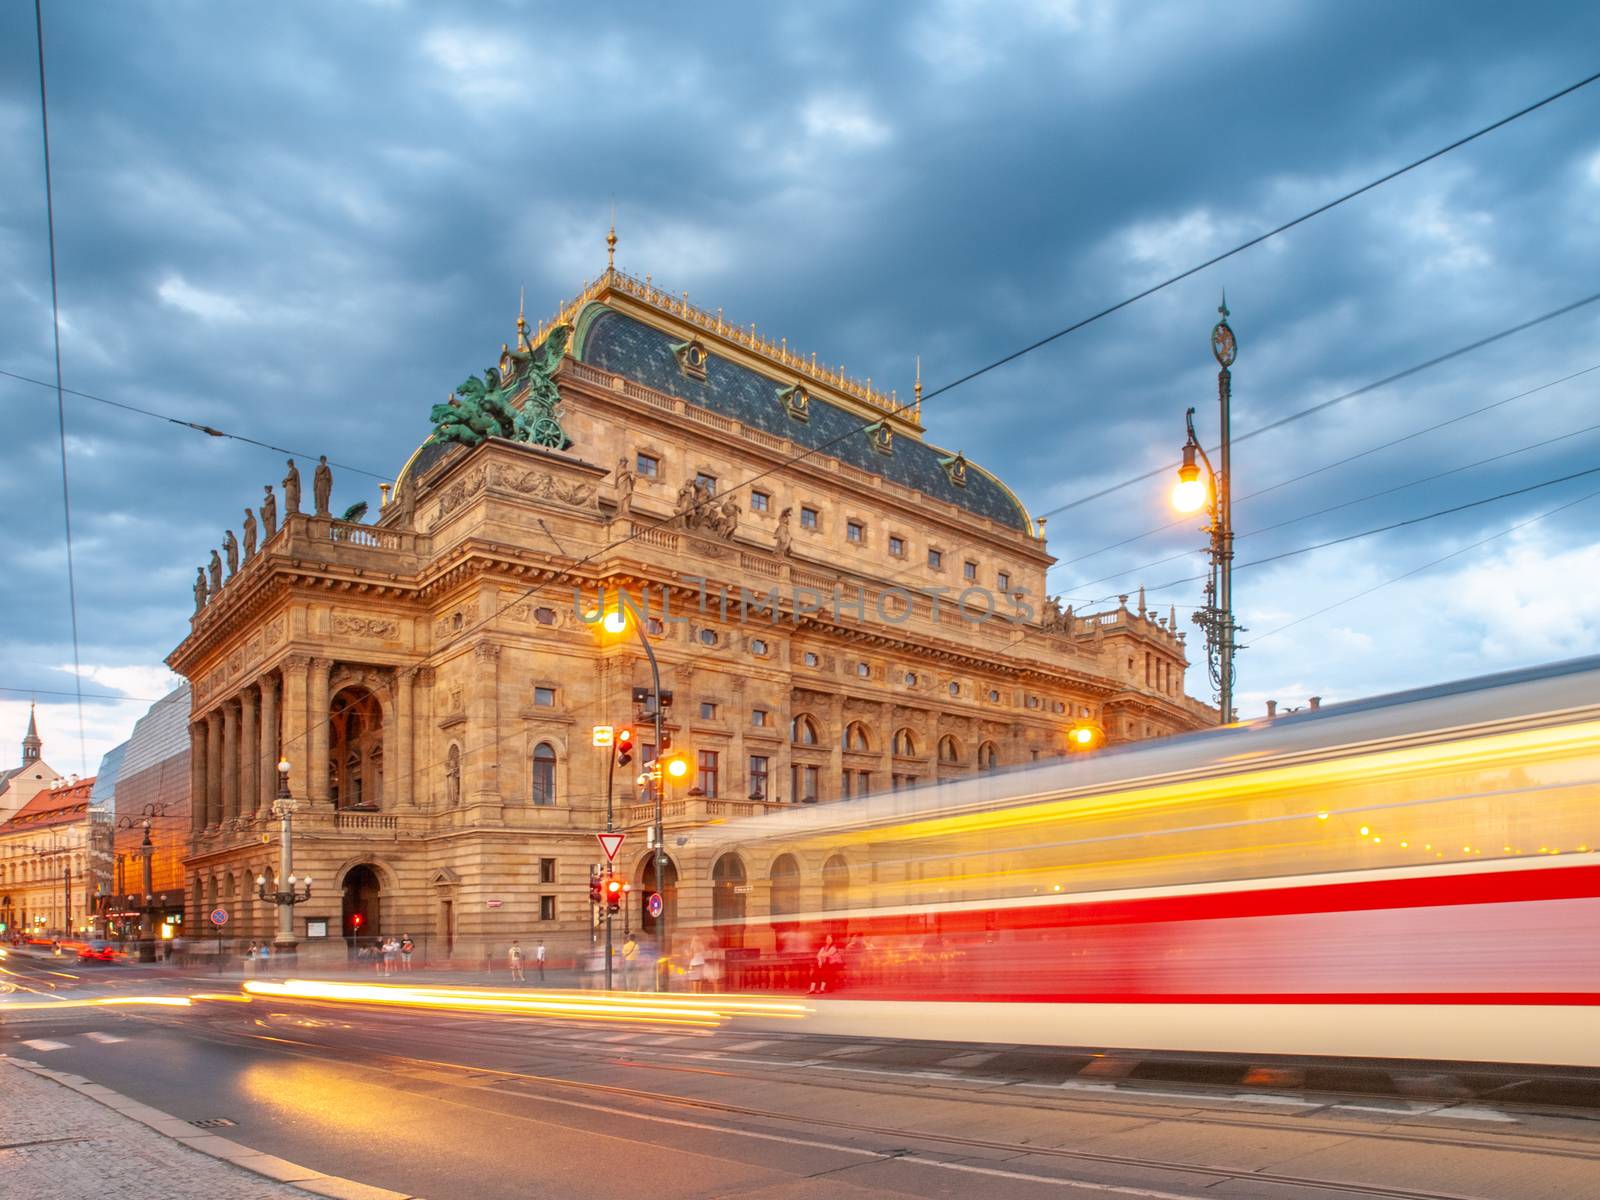 Evening at National Theater and blurred tram on the bridge, Prague, Czech Republic. Long exposure shot by pyty